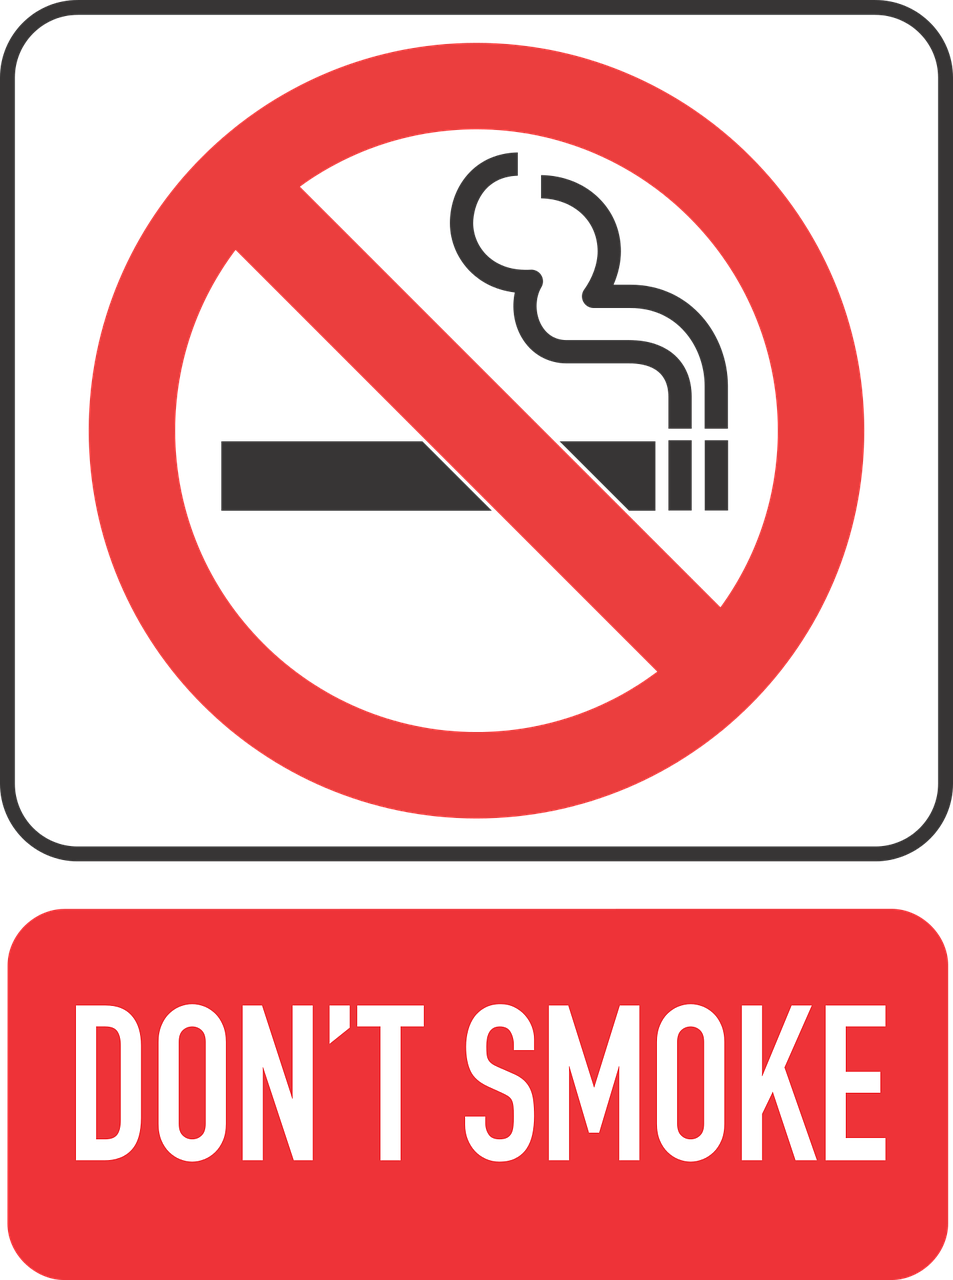 tips for visiting sydney, no smoking